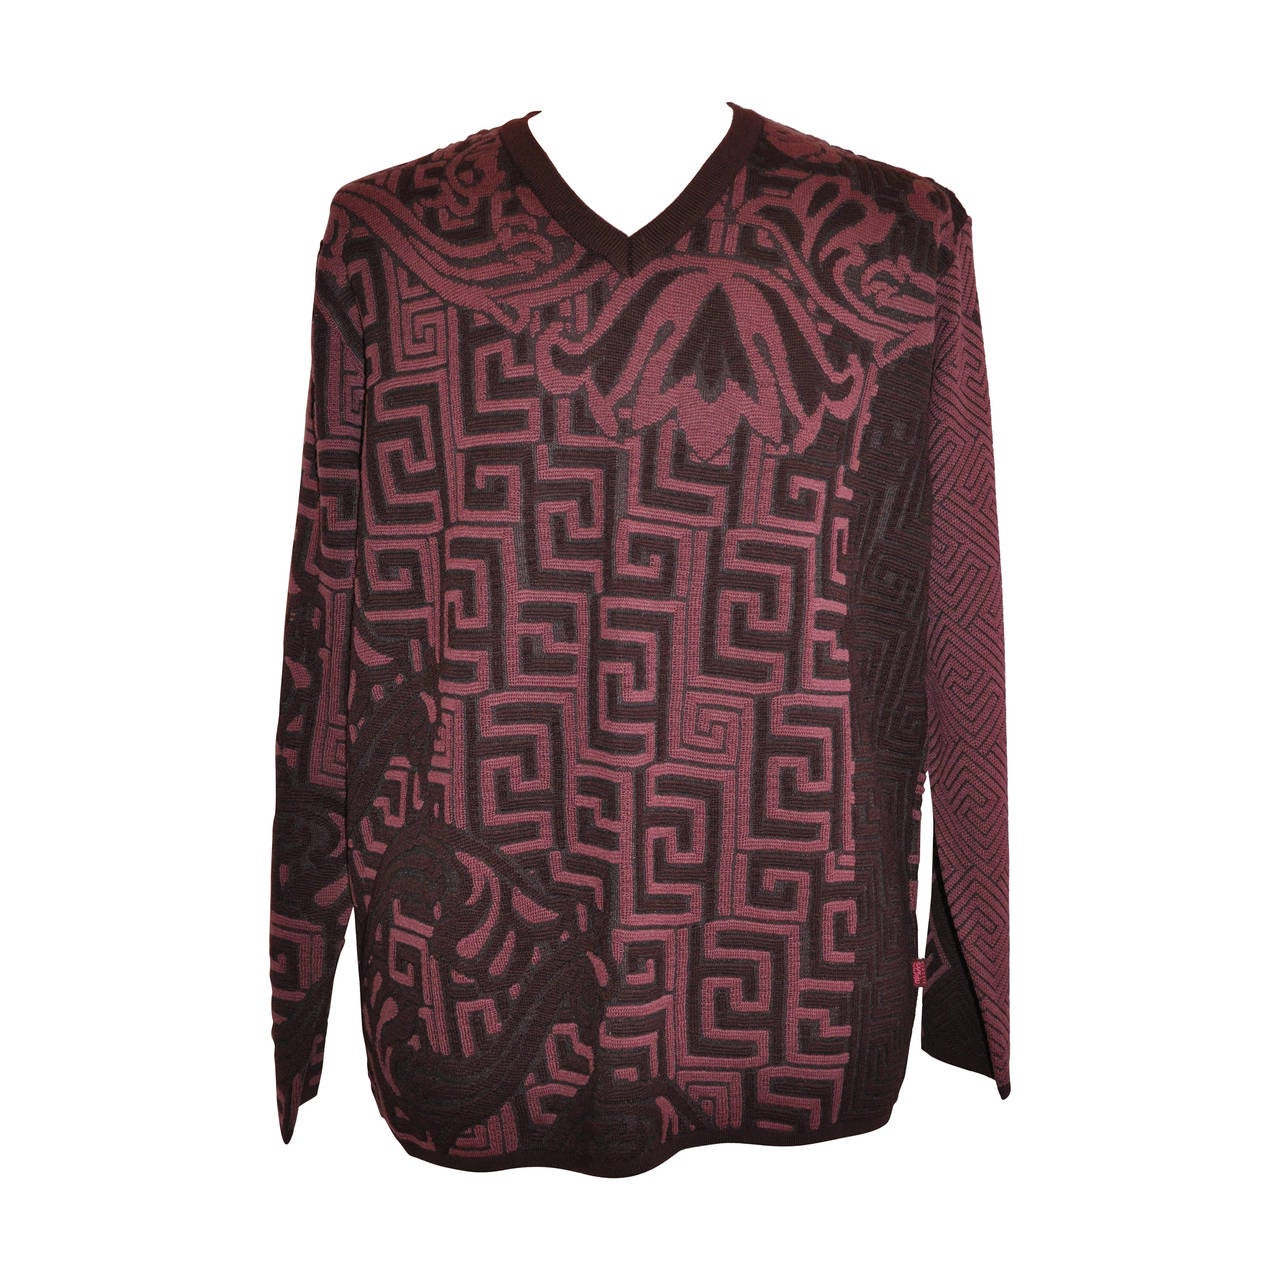 Gianni Versace Men's Plum and Lavender V-Neck Pullover For Sale at 1stdibs